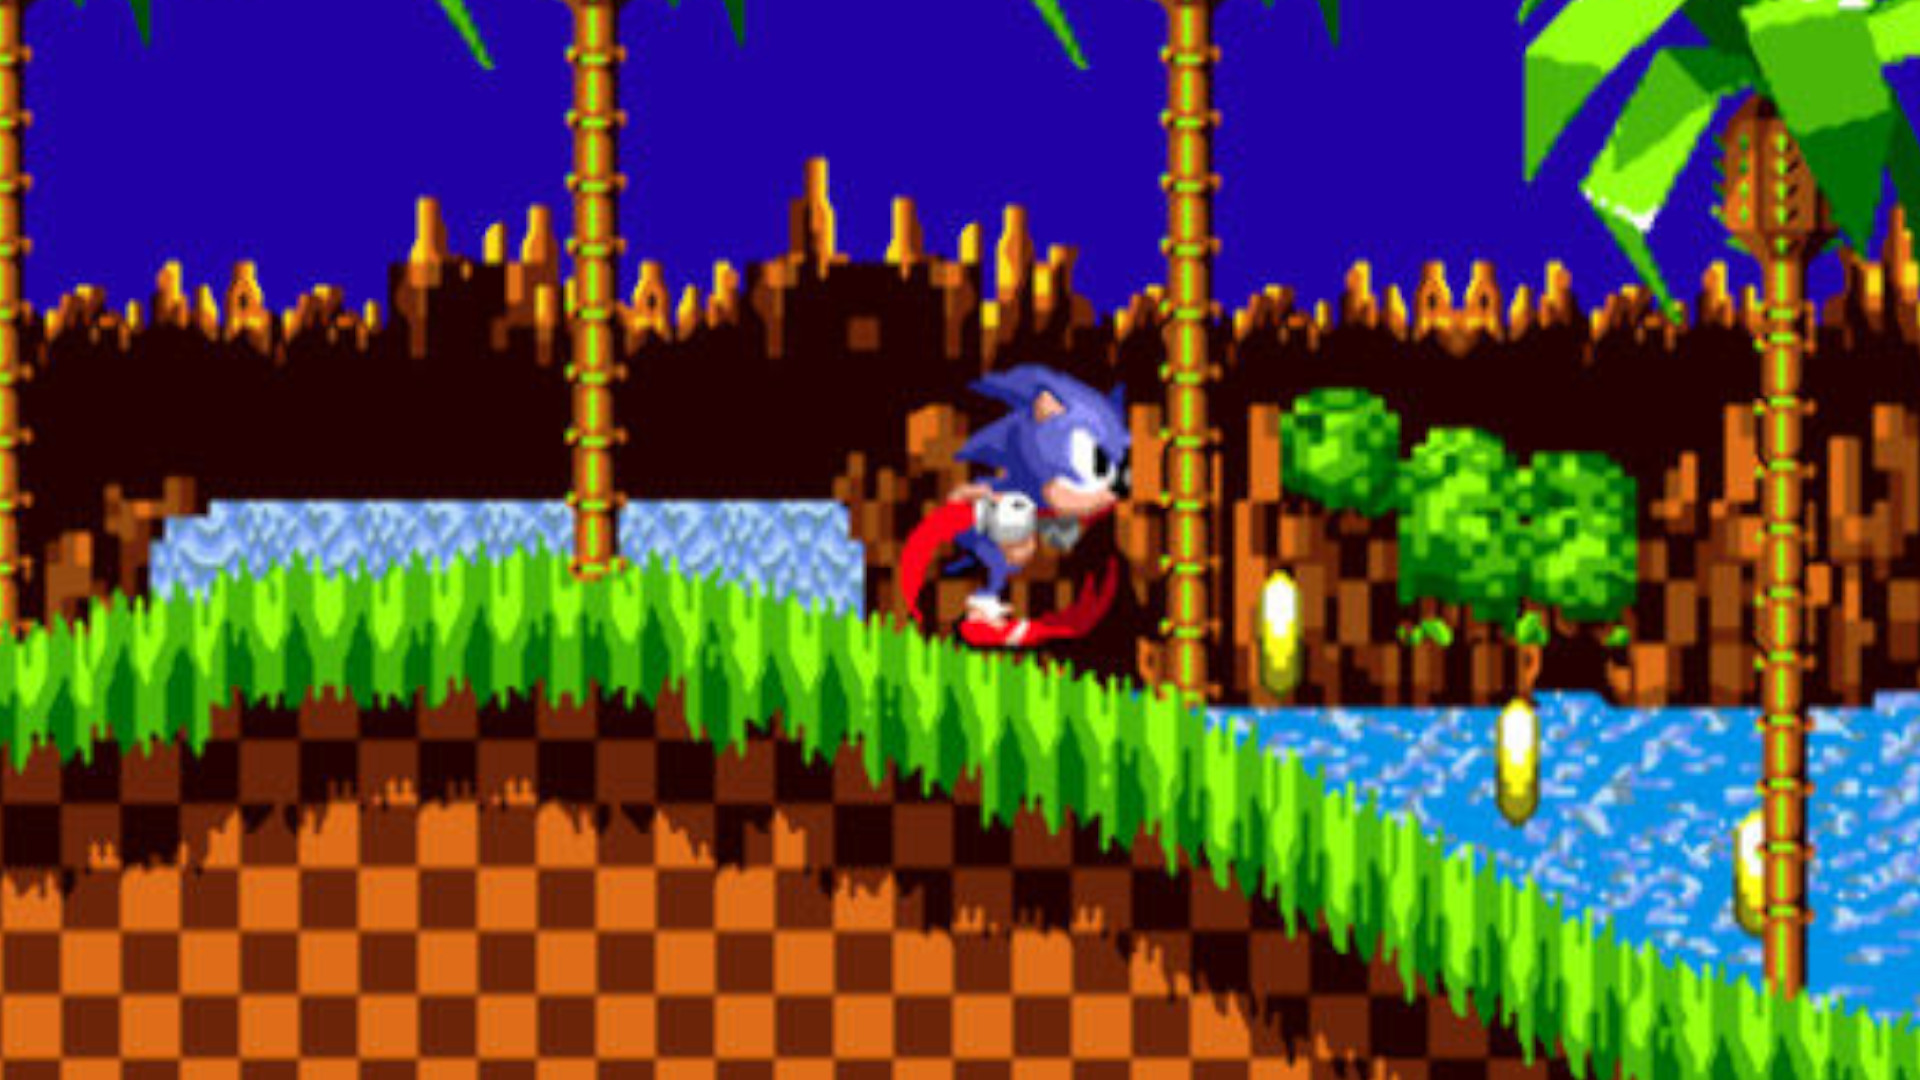 Sega is removing classic Sonic games from sale ahead of Sonic Origins  launch